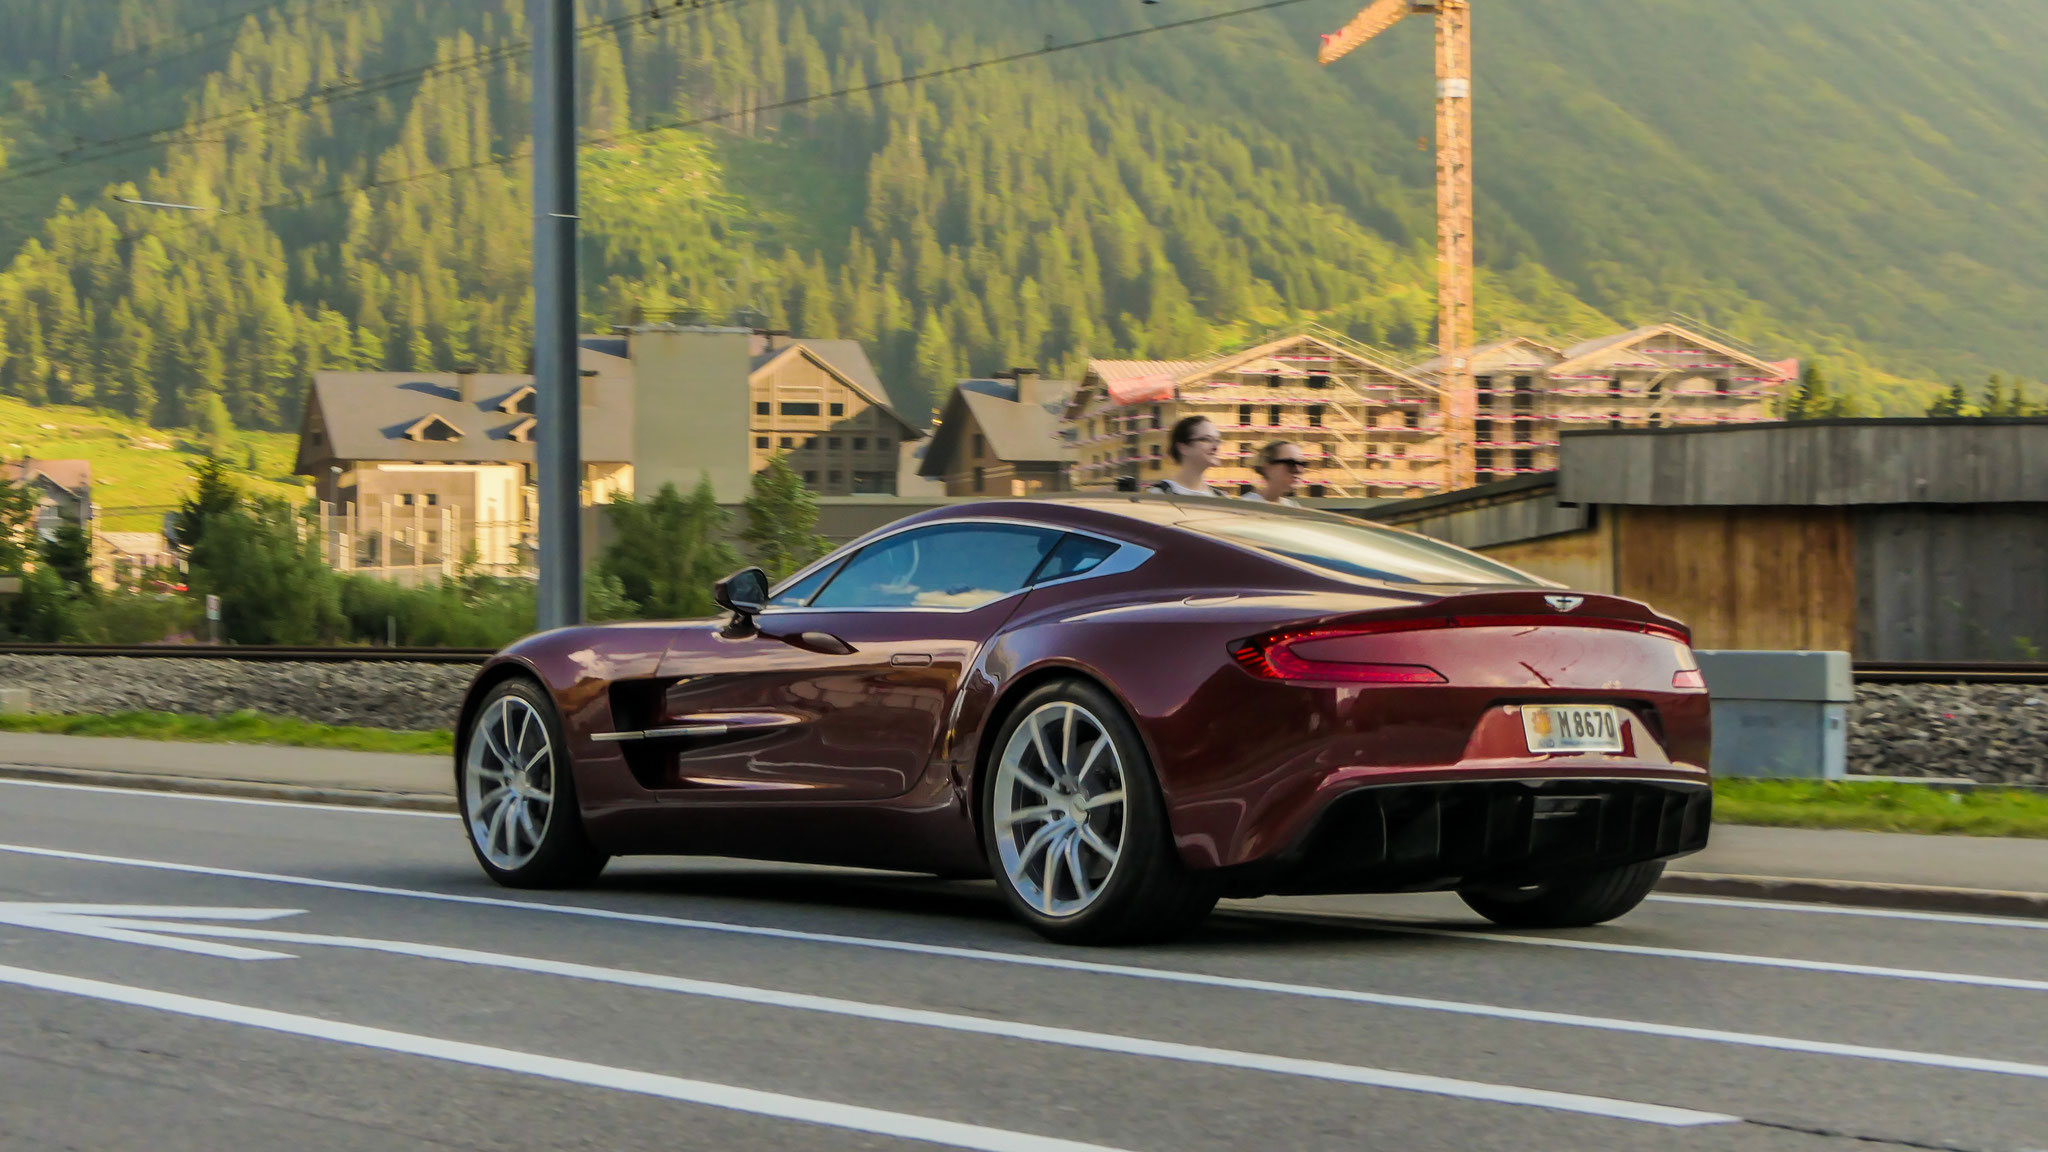 Aston Martin One-77 - M8670 (AND)